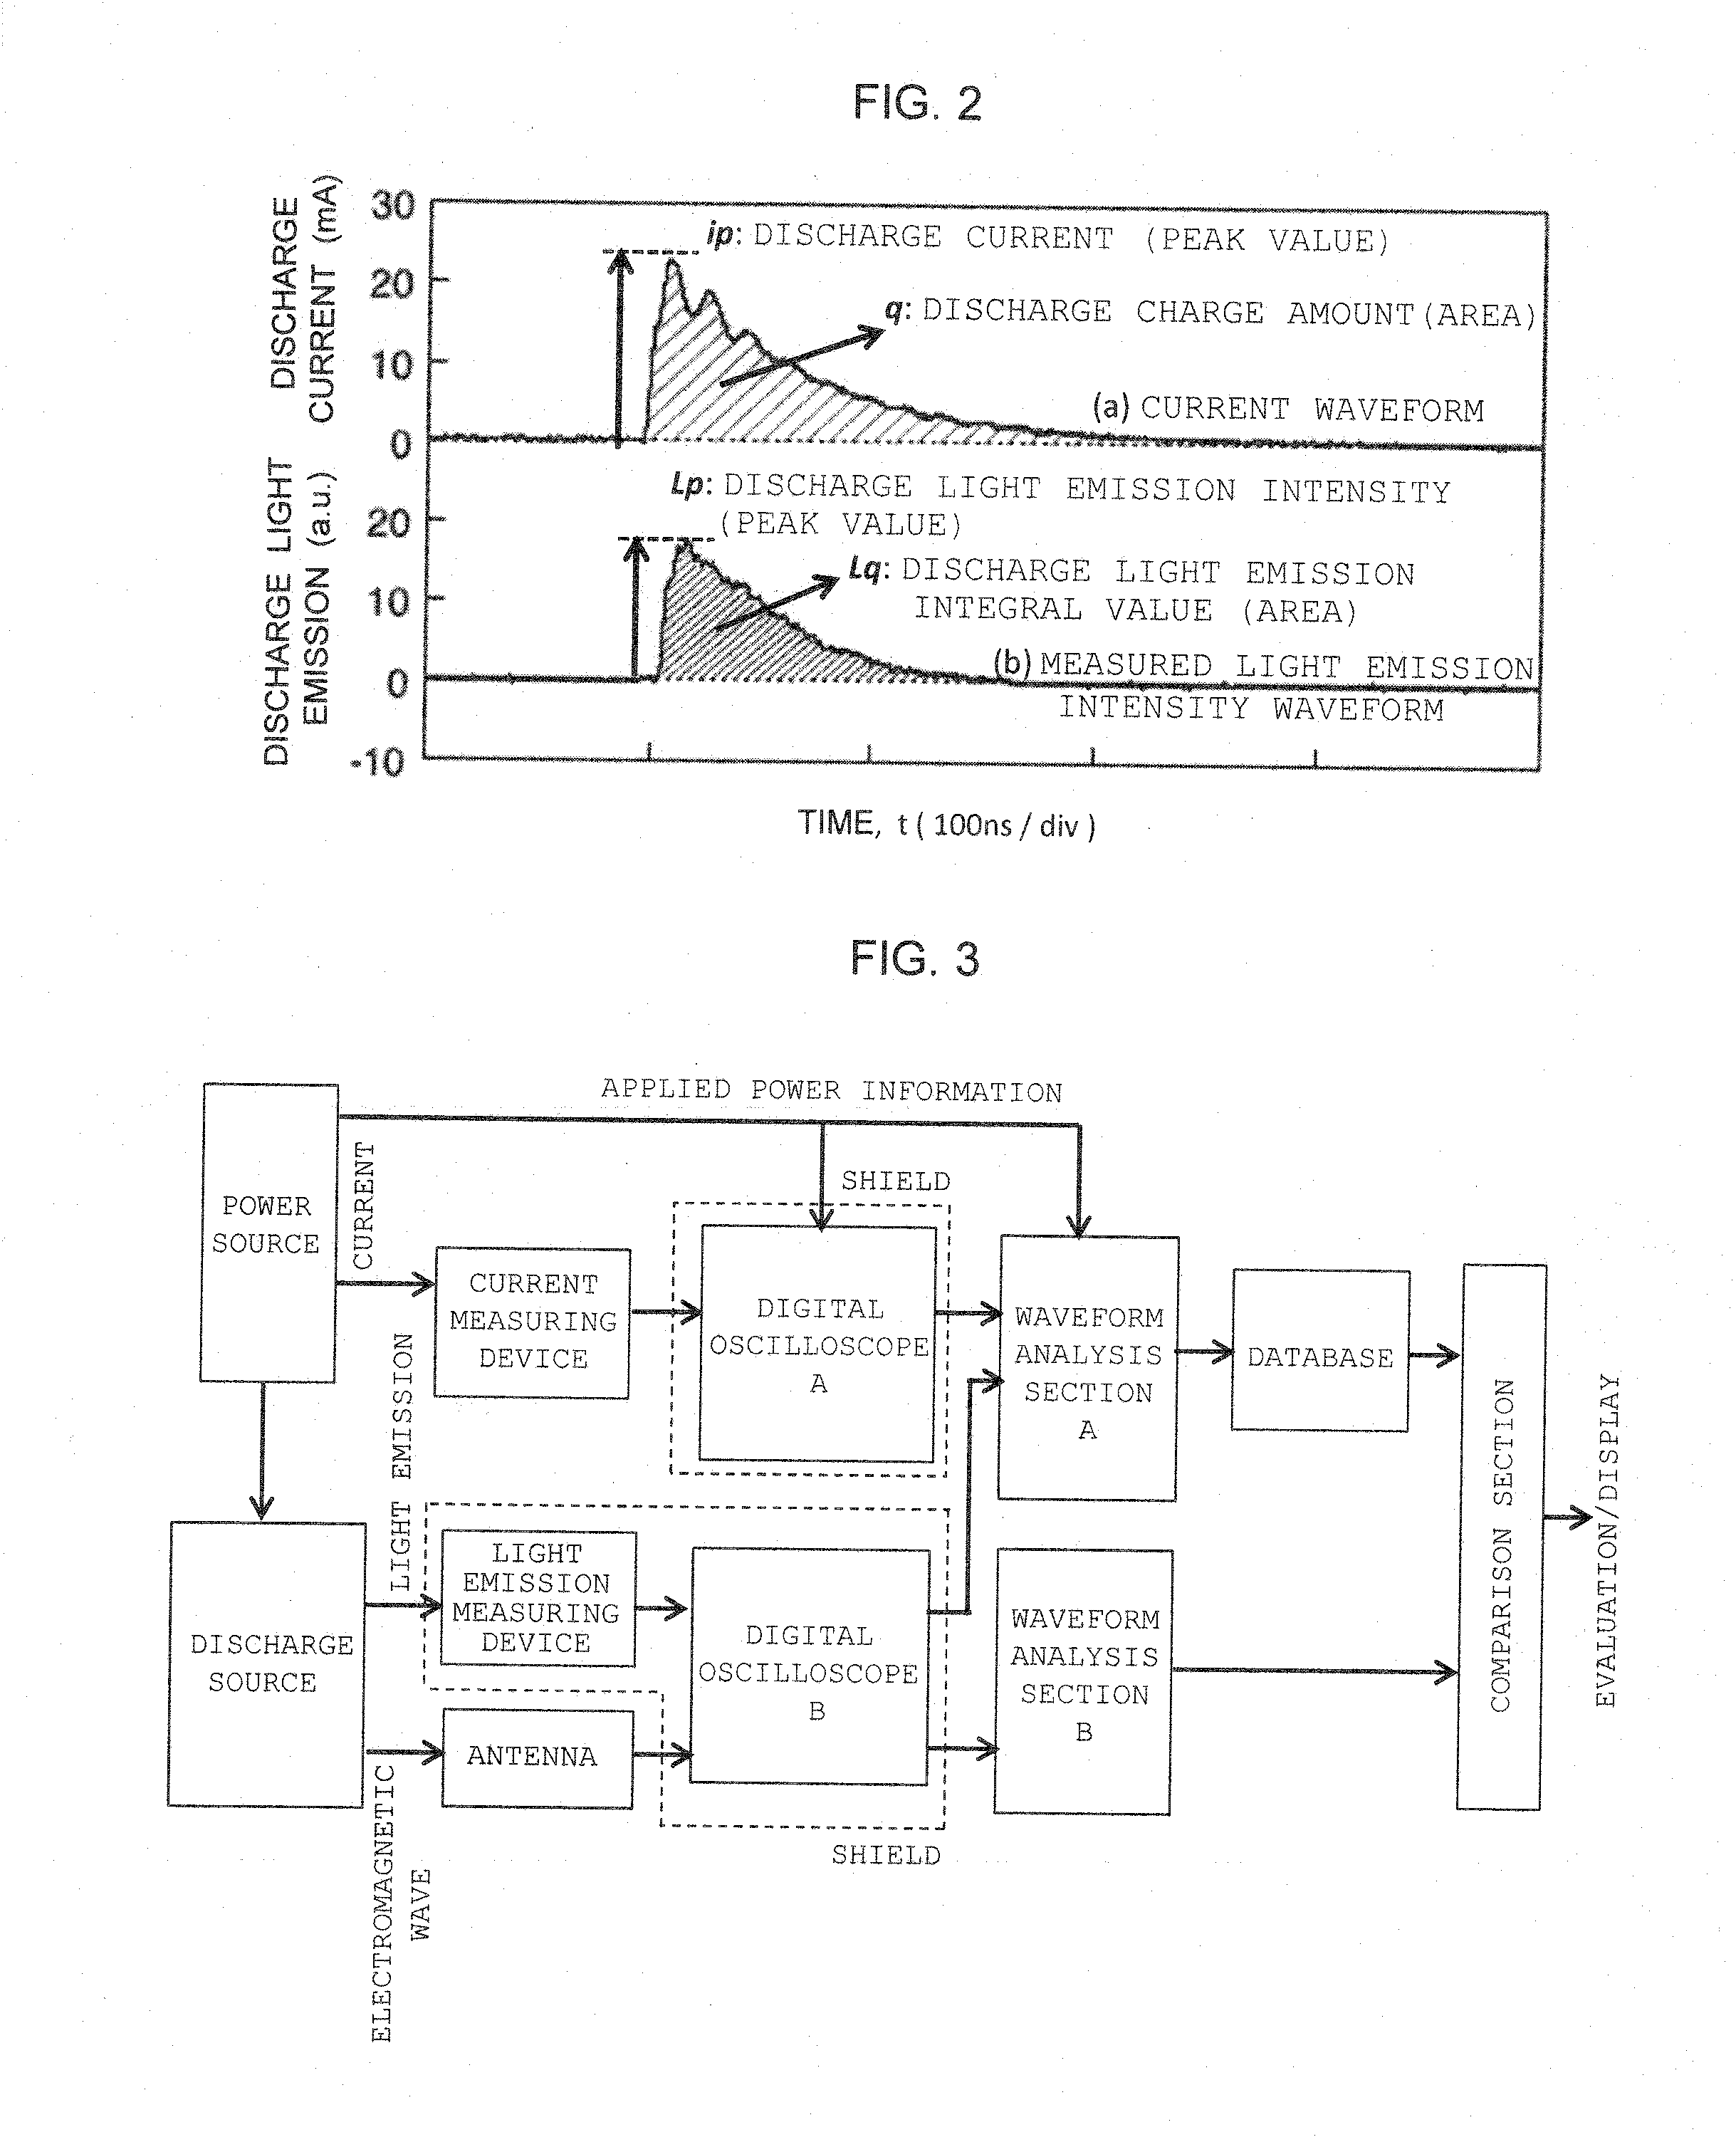 Non-contact discharge test method and device